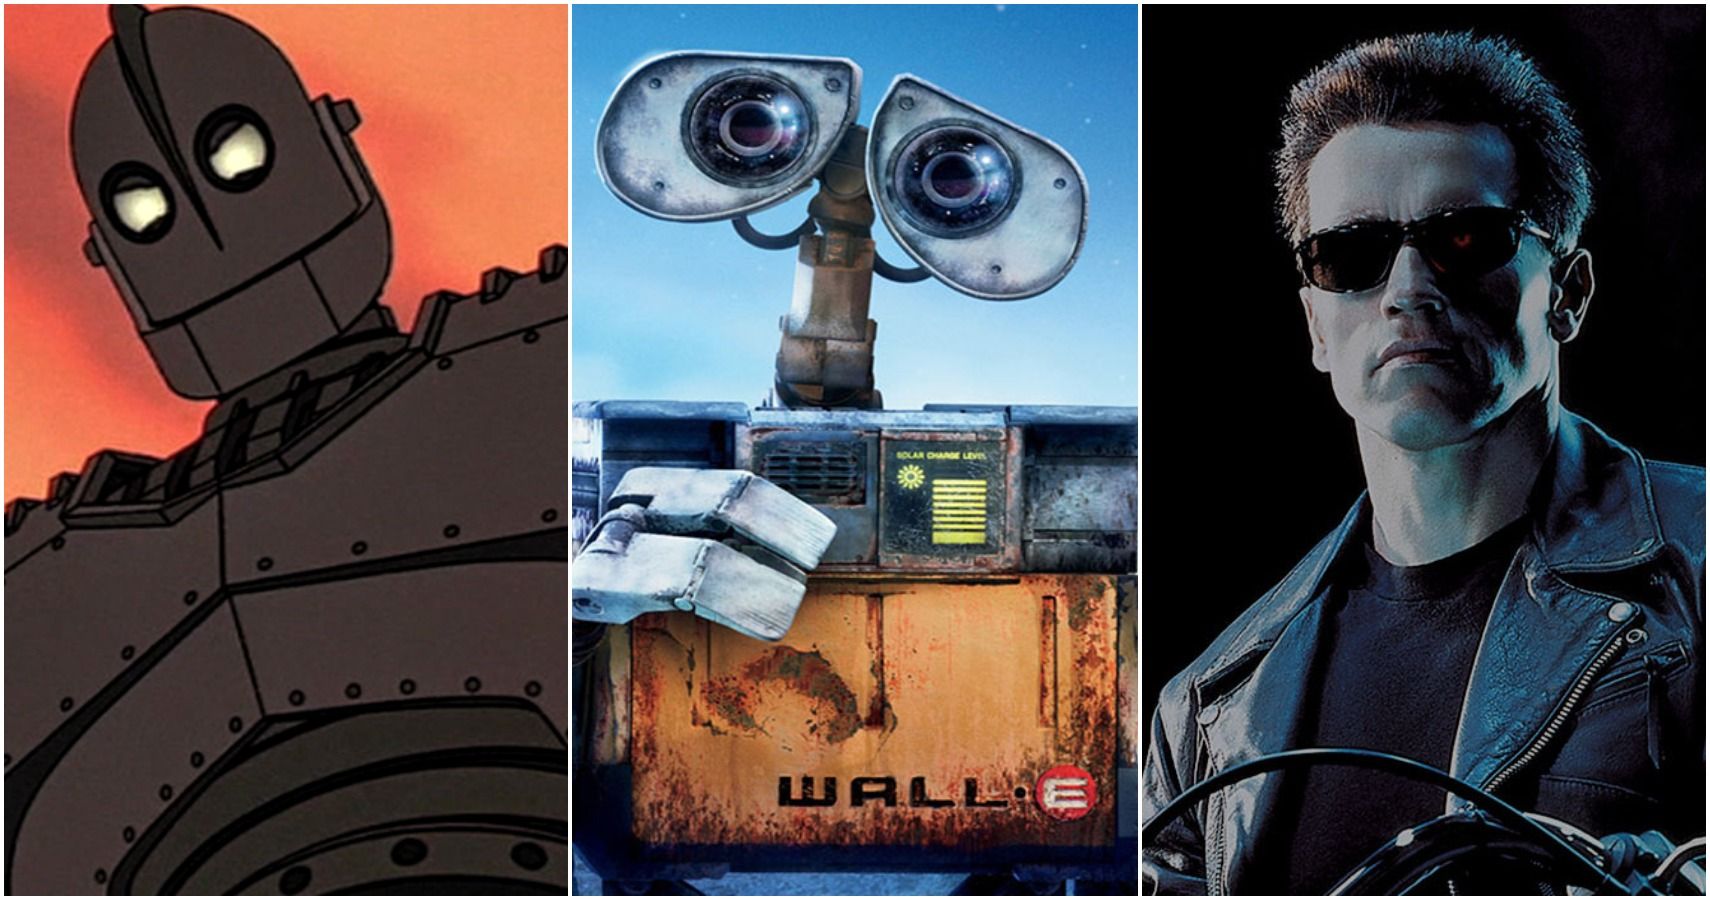 5 Robots From Movies We'd Love To Hang Out With (& 5 We Wouldn't)